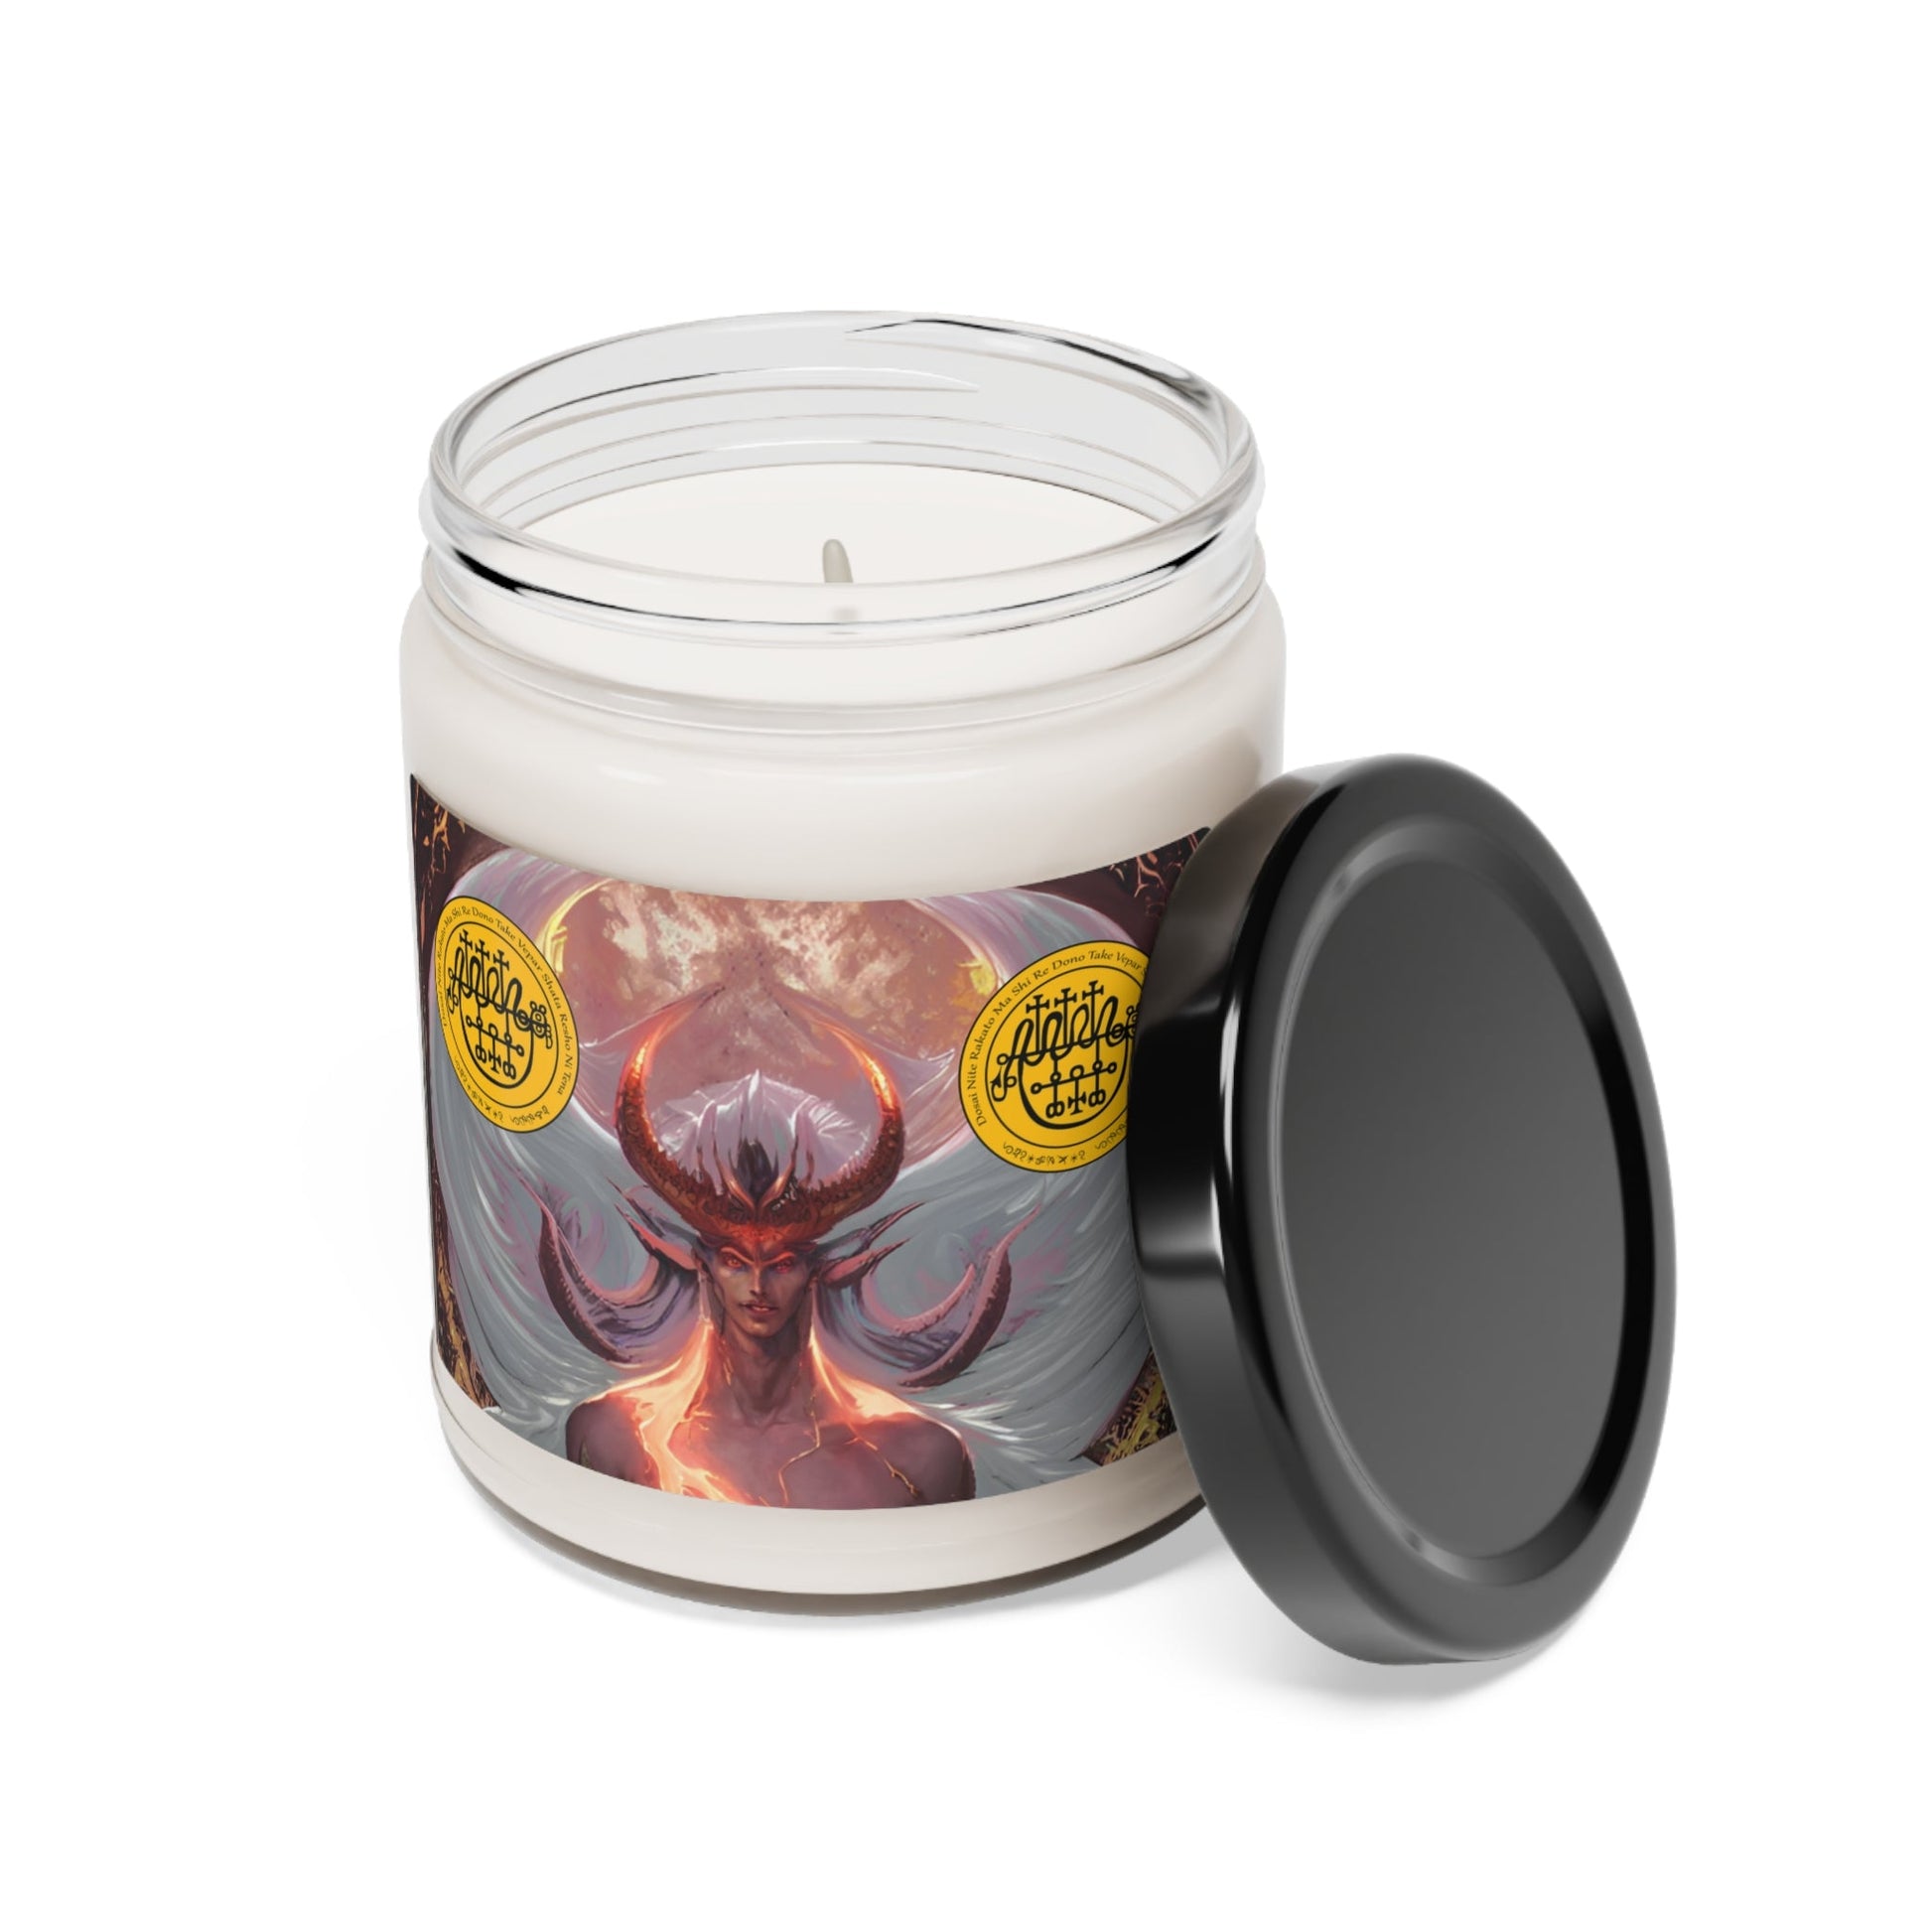 Demon-Vepar-Altar-Scented-Soy-Candle-for-offerings-rituals-initiations-or-praying-and-meditation-2